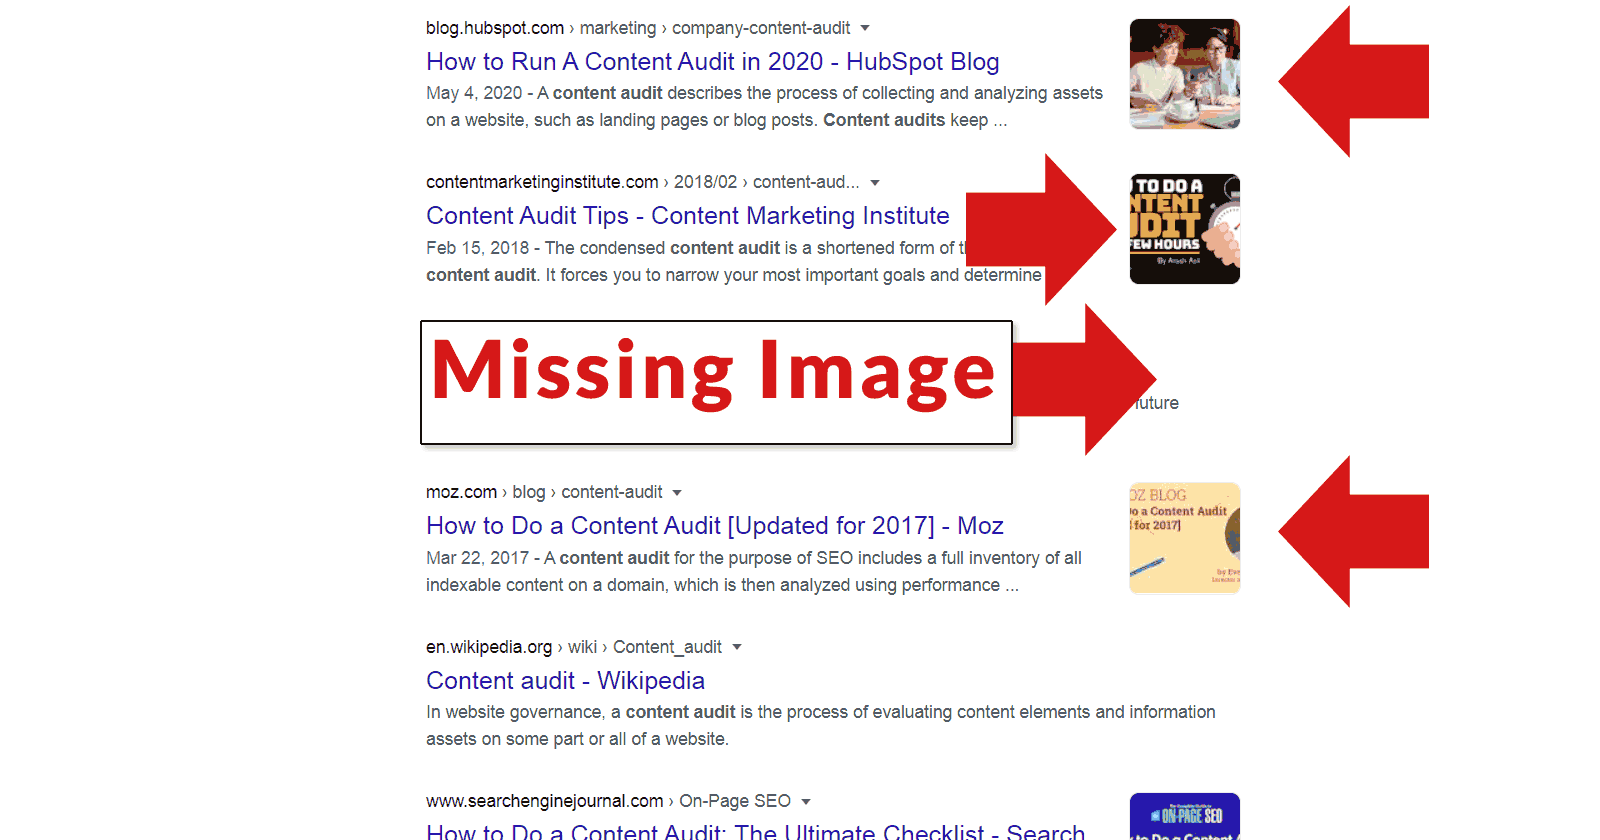 Google Testing Thumbnail Images in Search Results